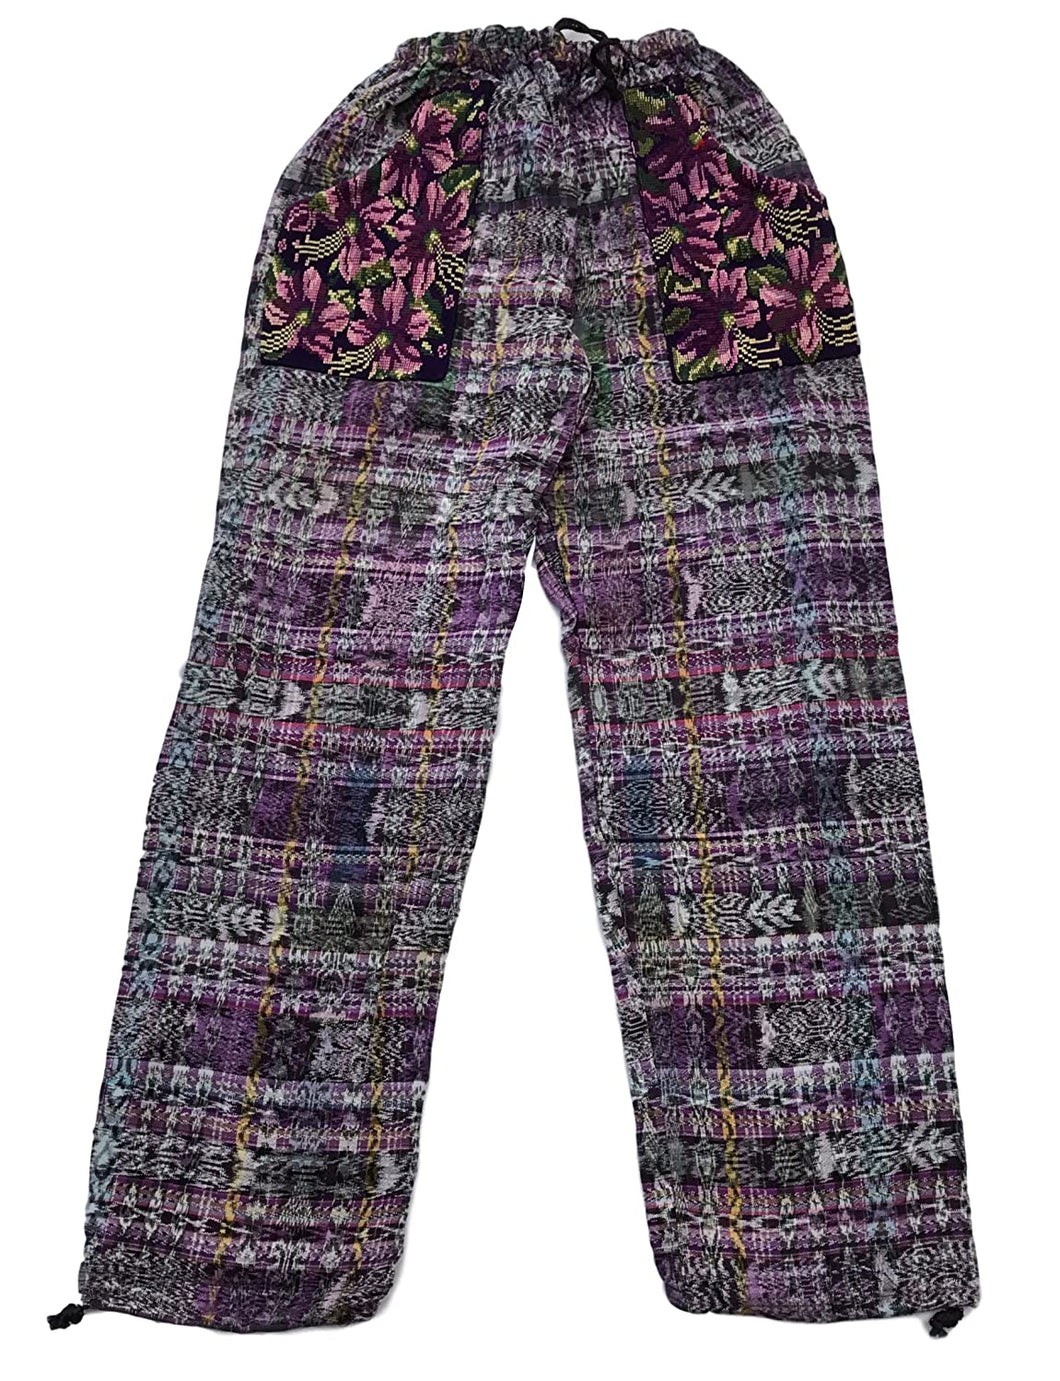 Guatemalan Corte Style Pants with Huipil Pockets - Multicolored